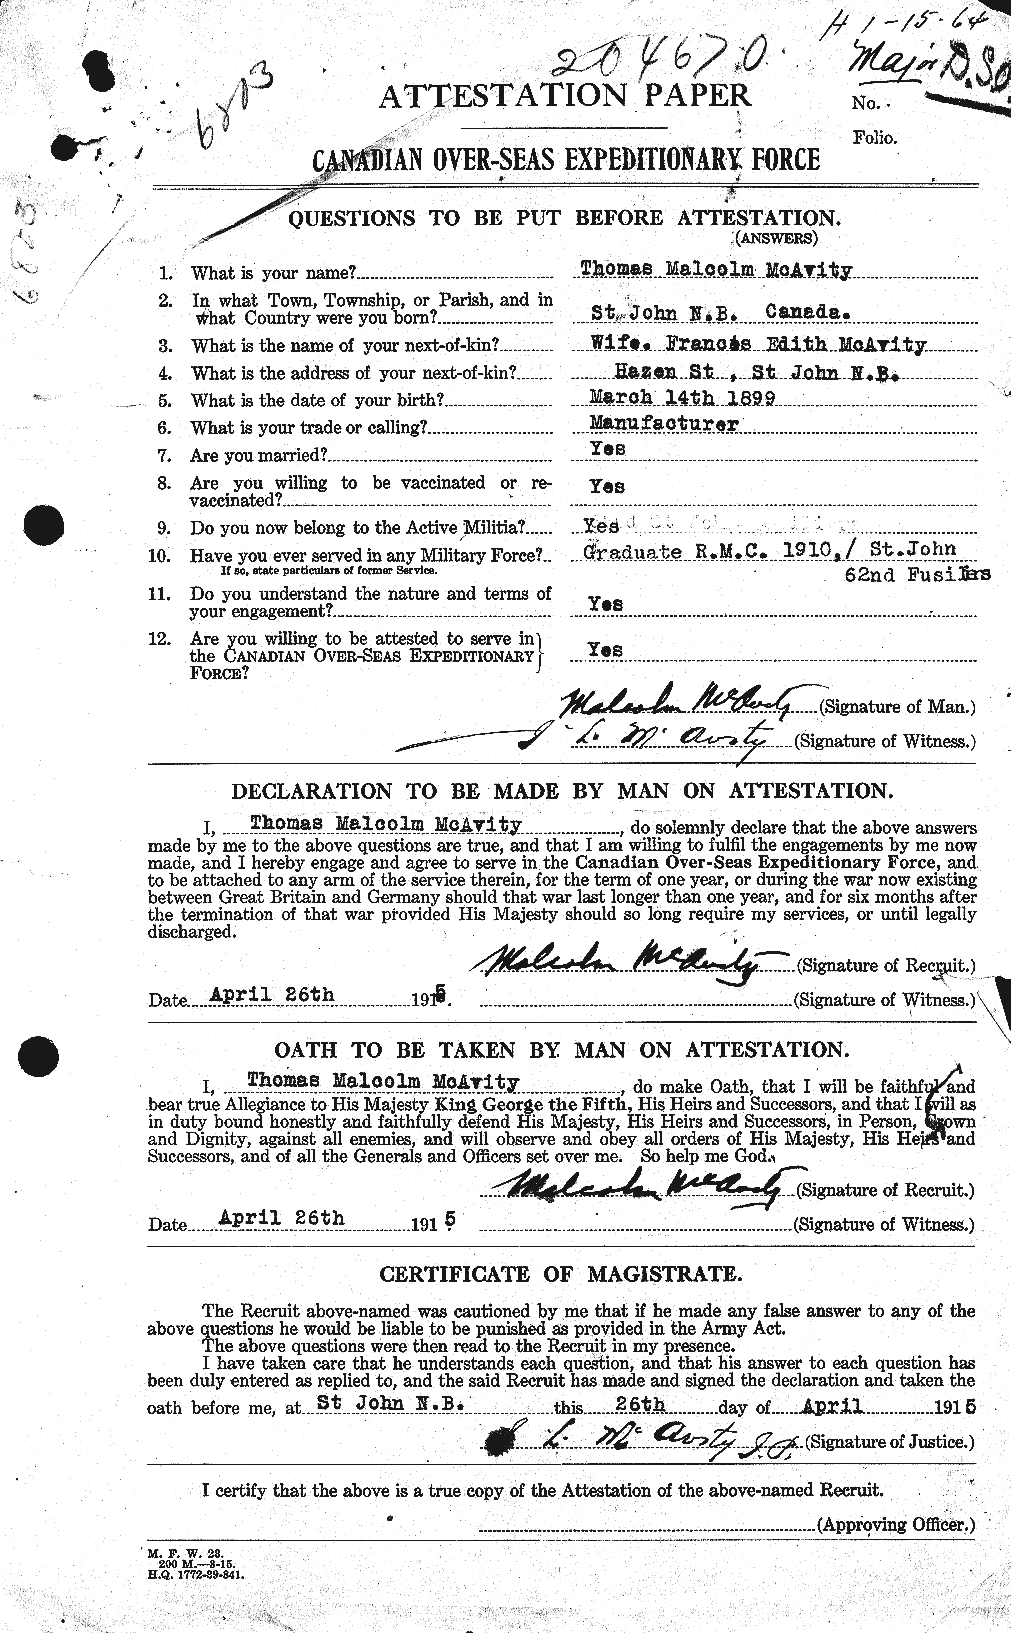 Personnel Records of the First World War - CEF 130039a